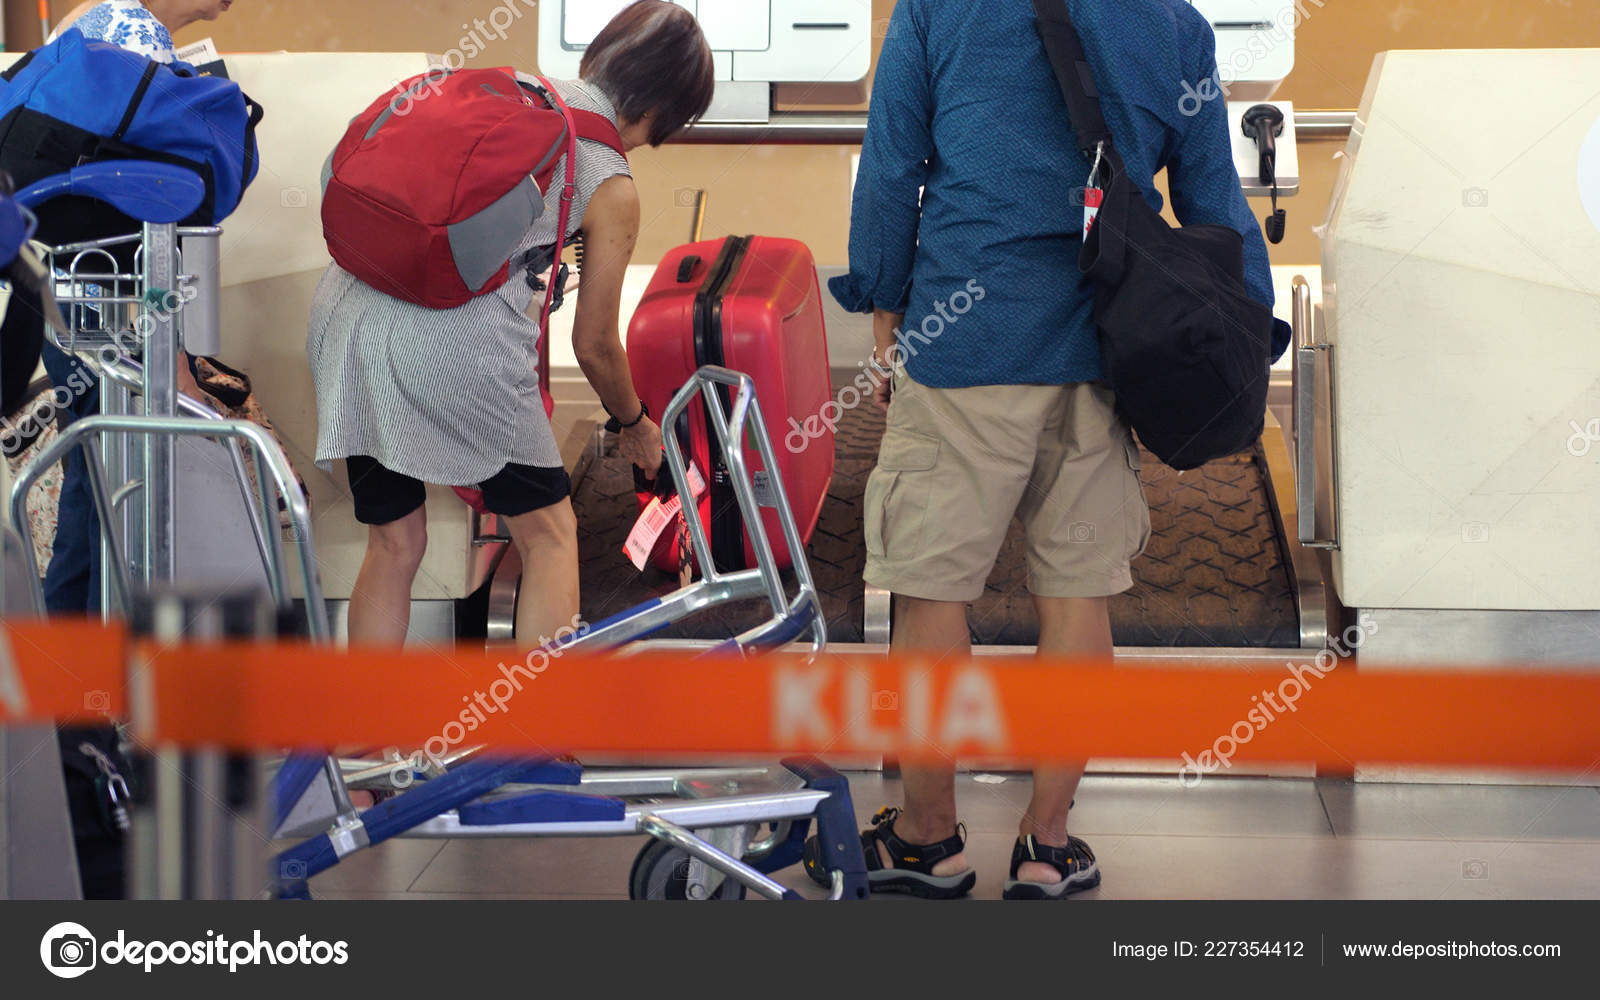 Singapore 13 July 2018 Travelers Check In Luggage On A Conveyor